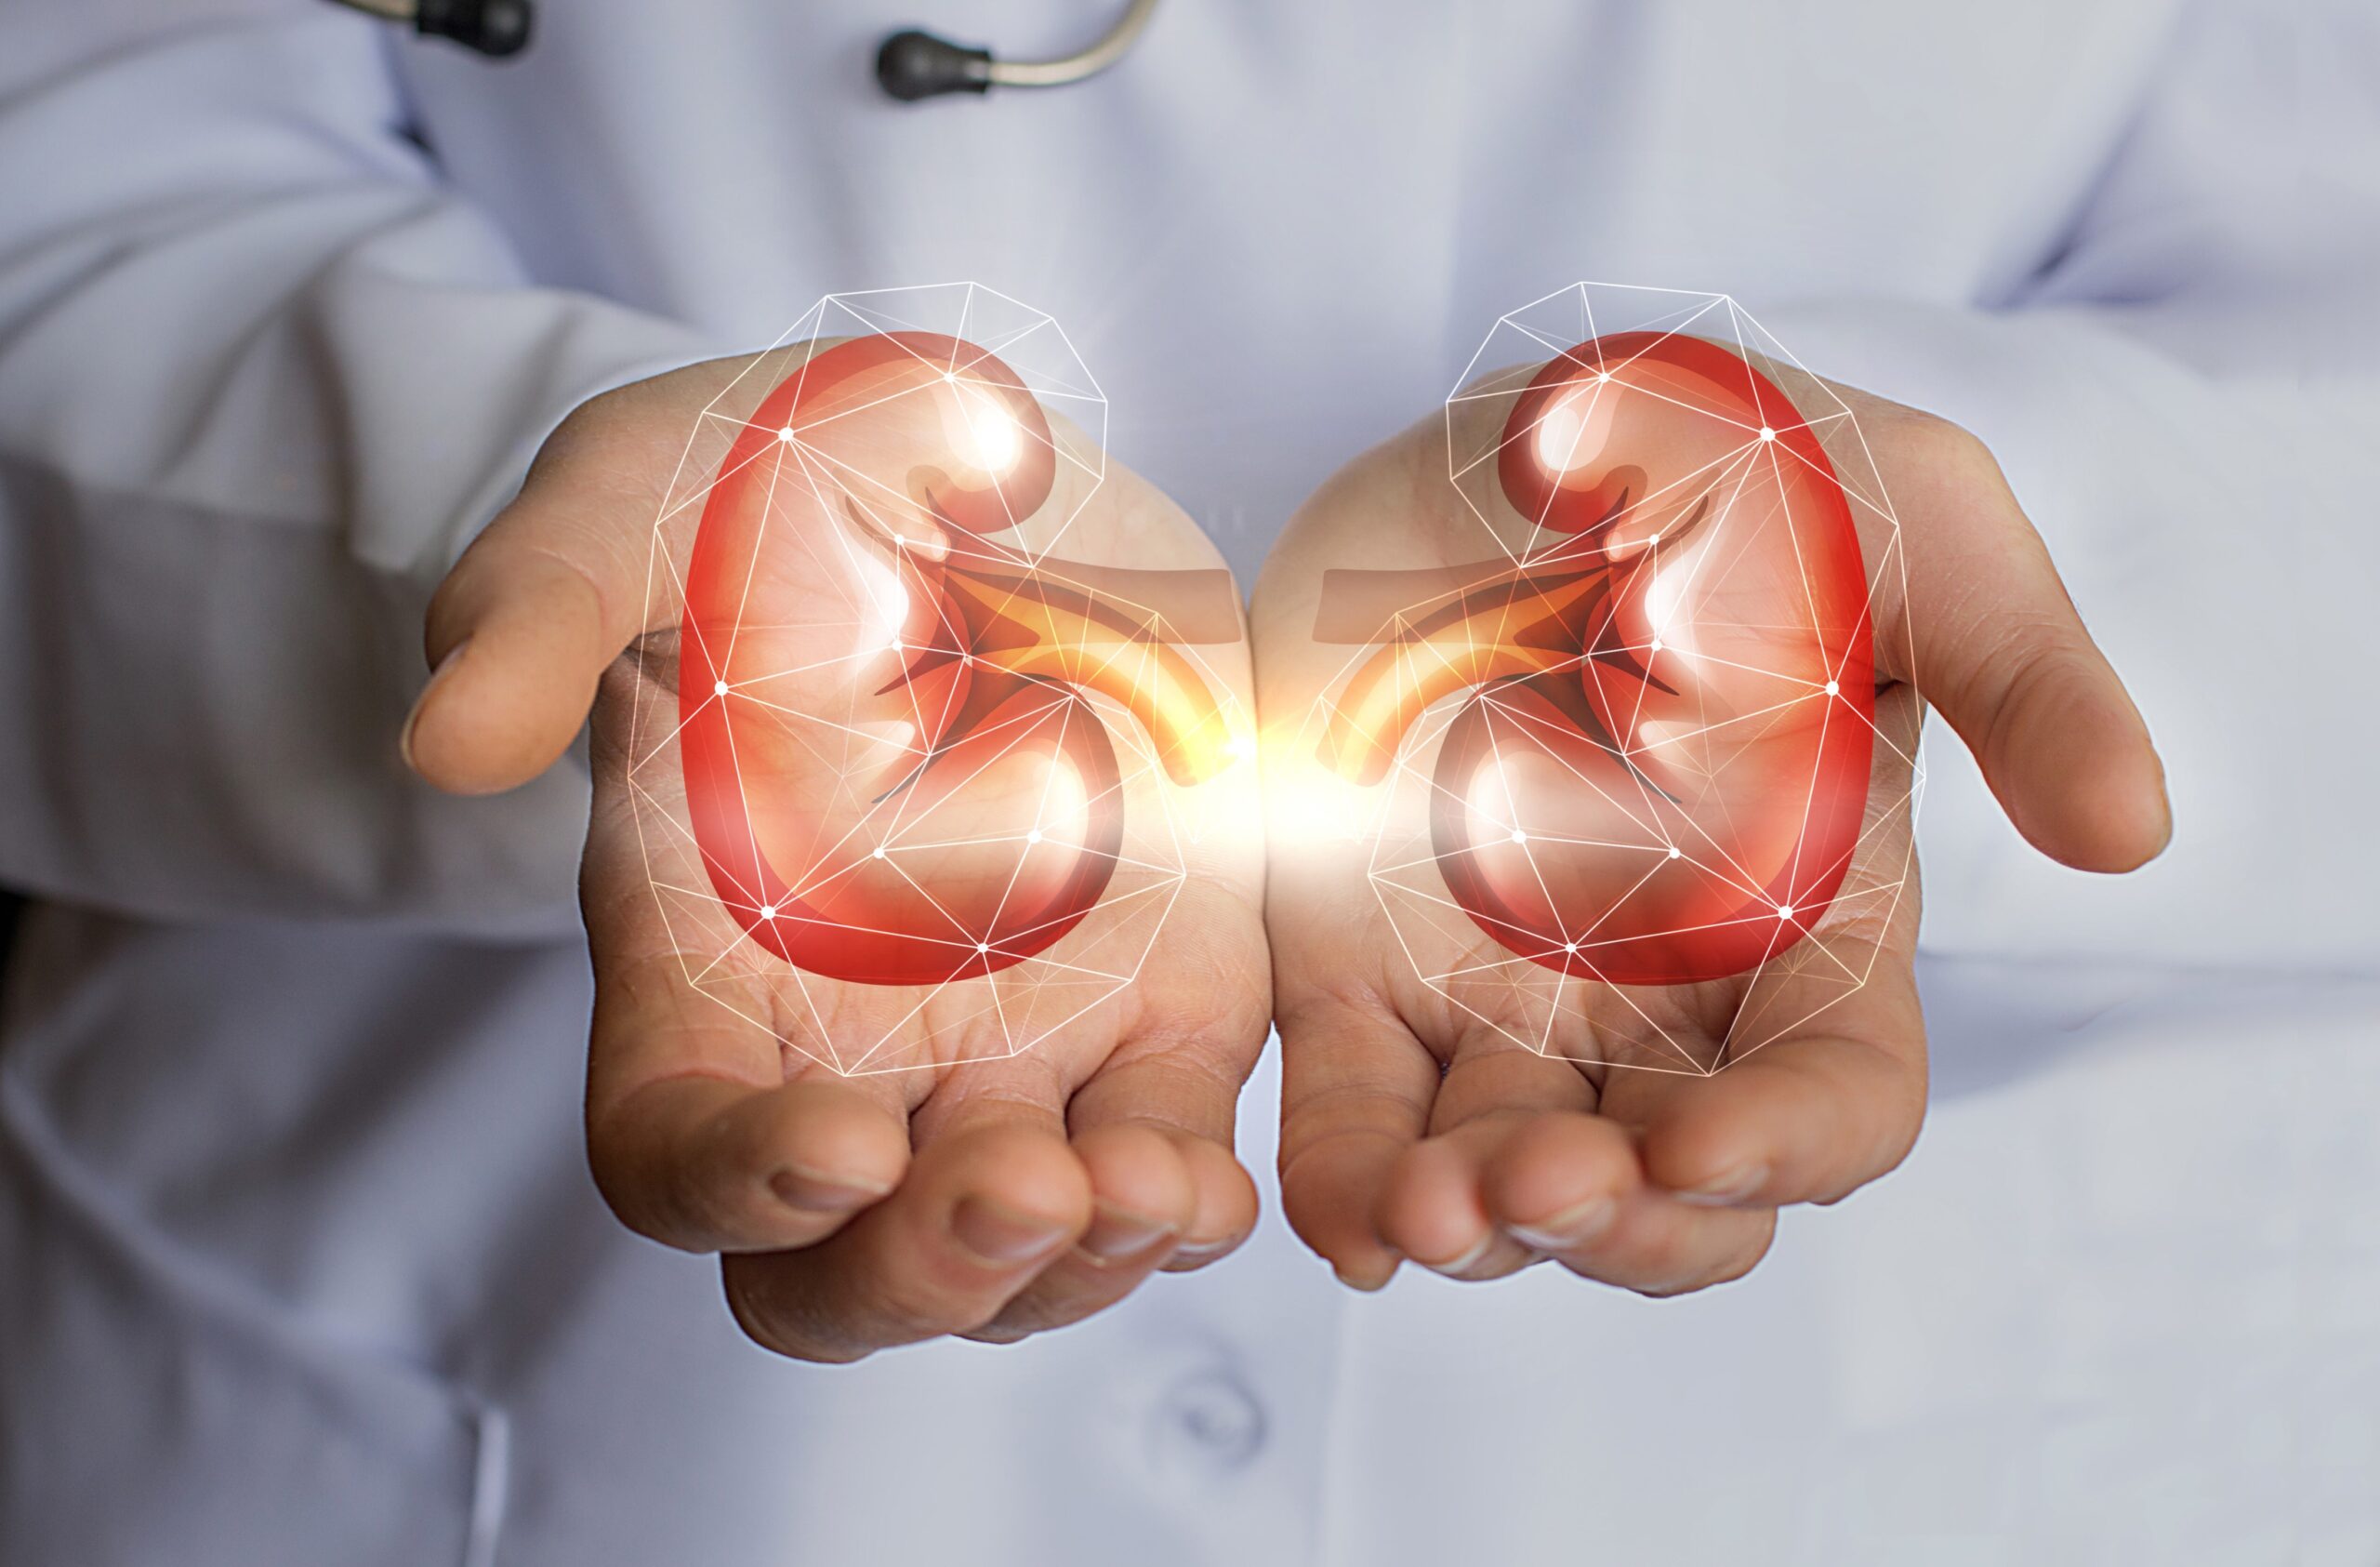 Experimental Made To Order Kidneys